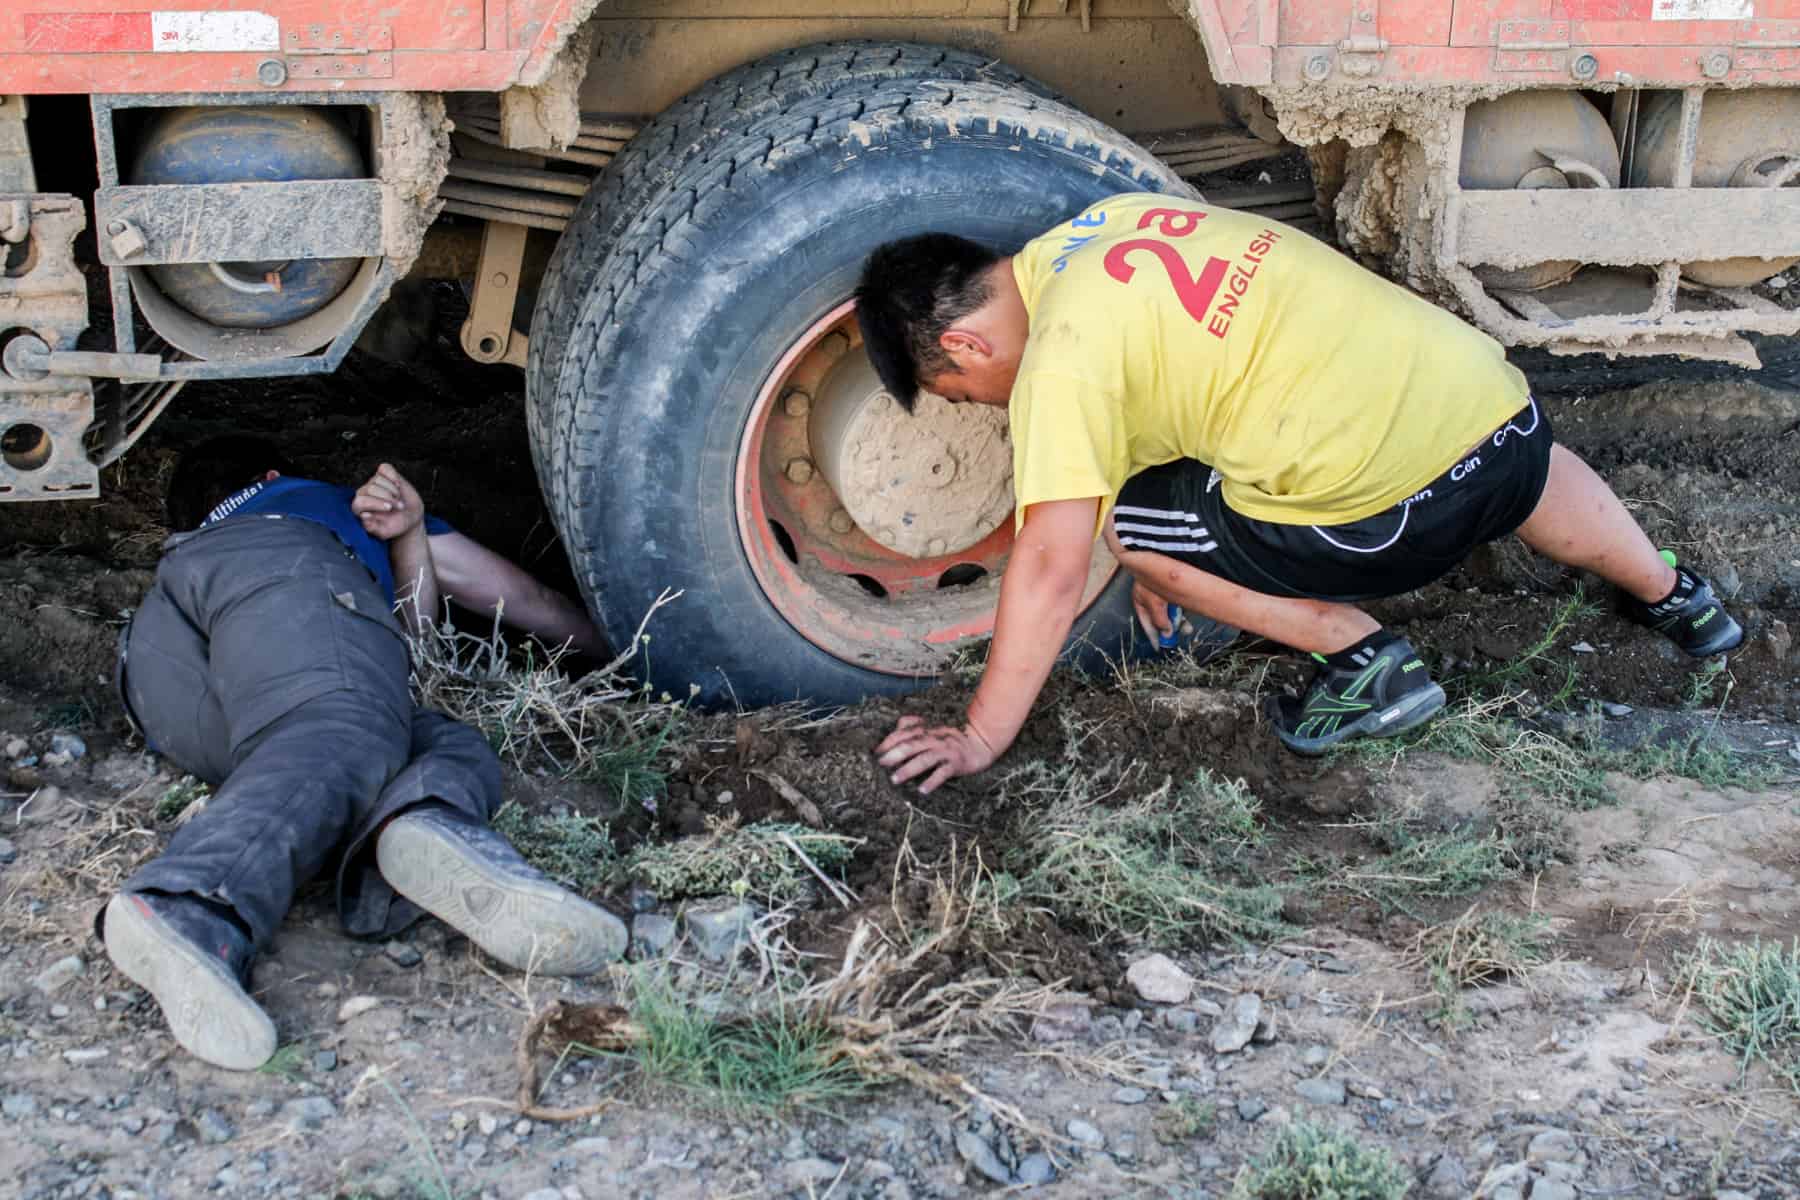 Teo men dig out a truck wheel from deep, wet mud while overlanding in Mongolia